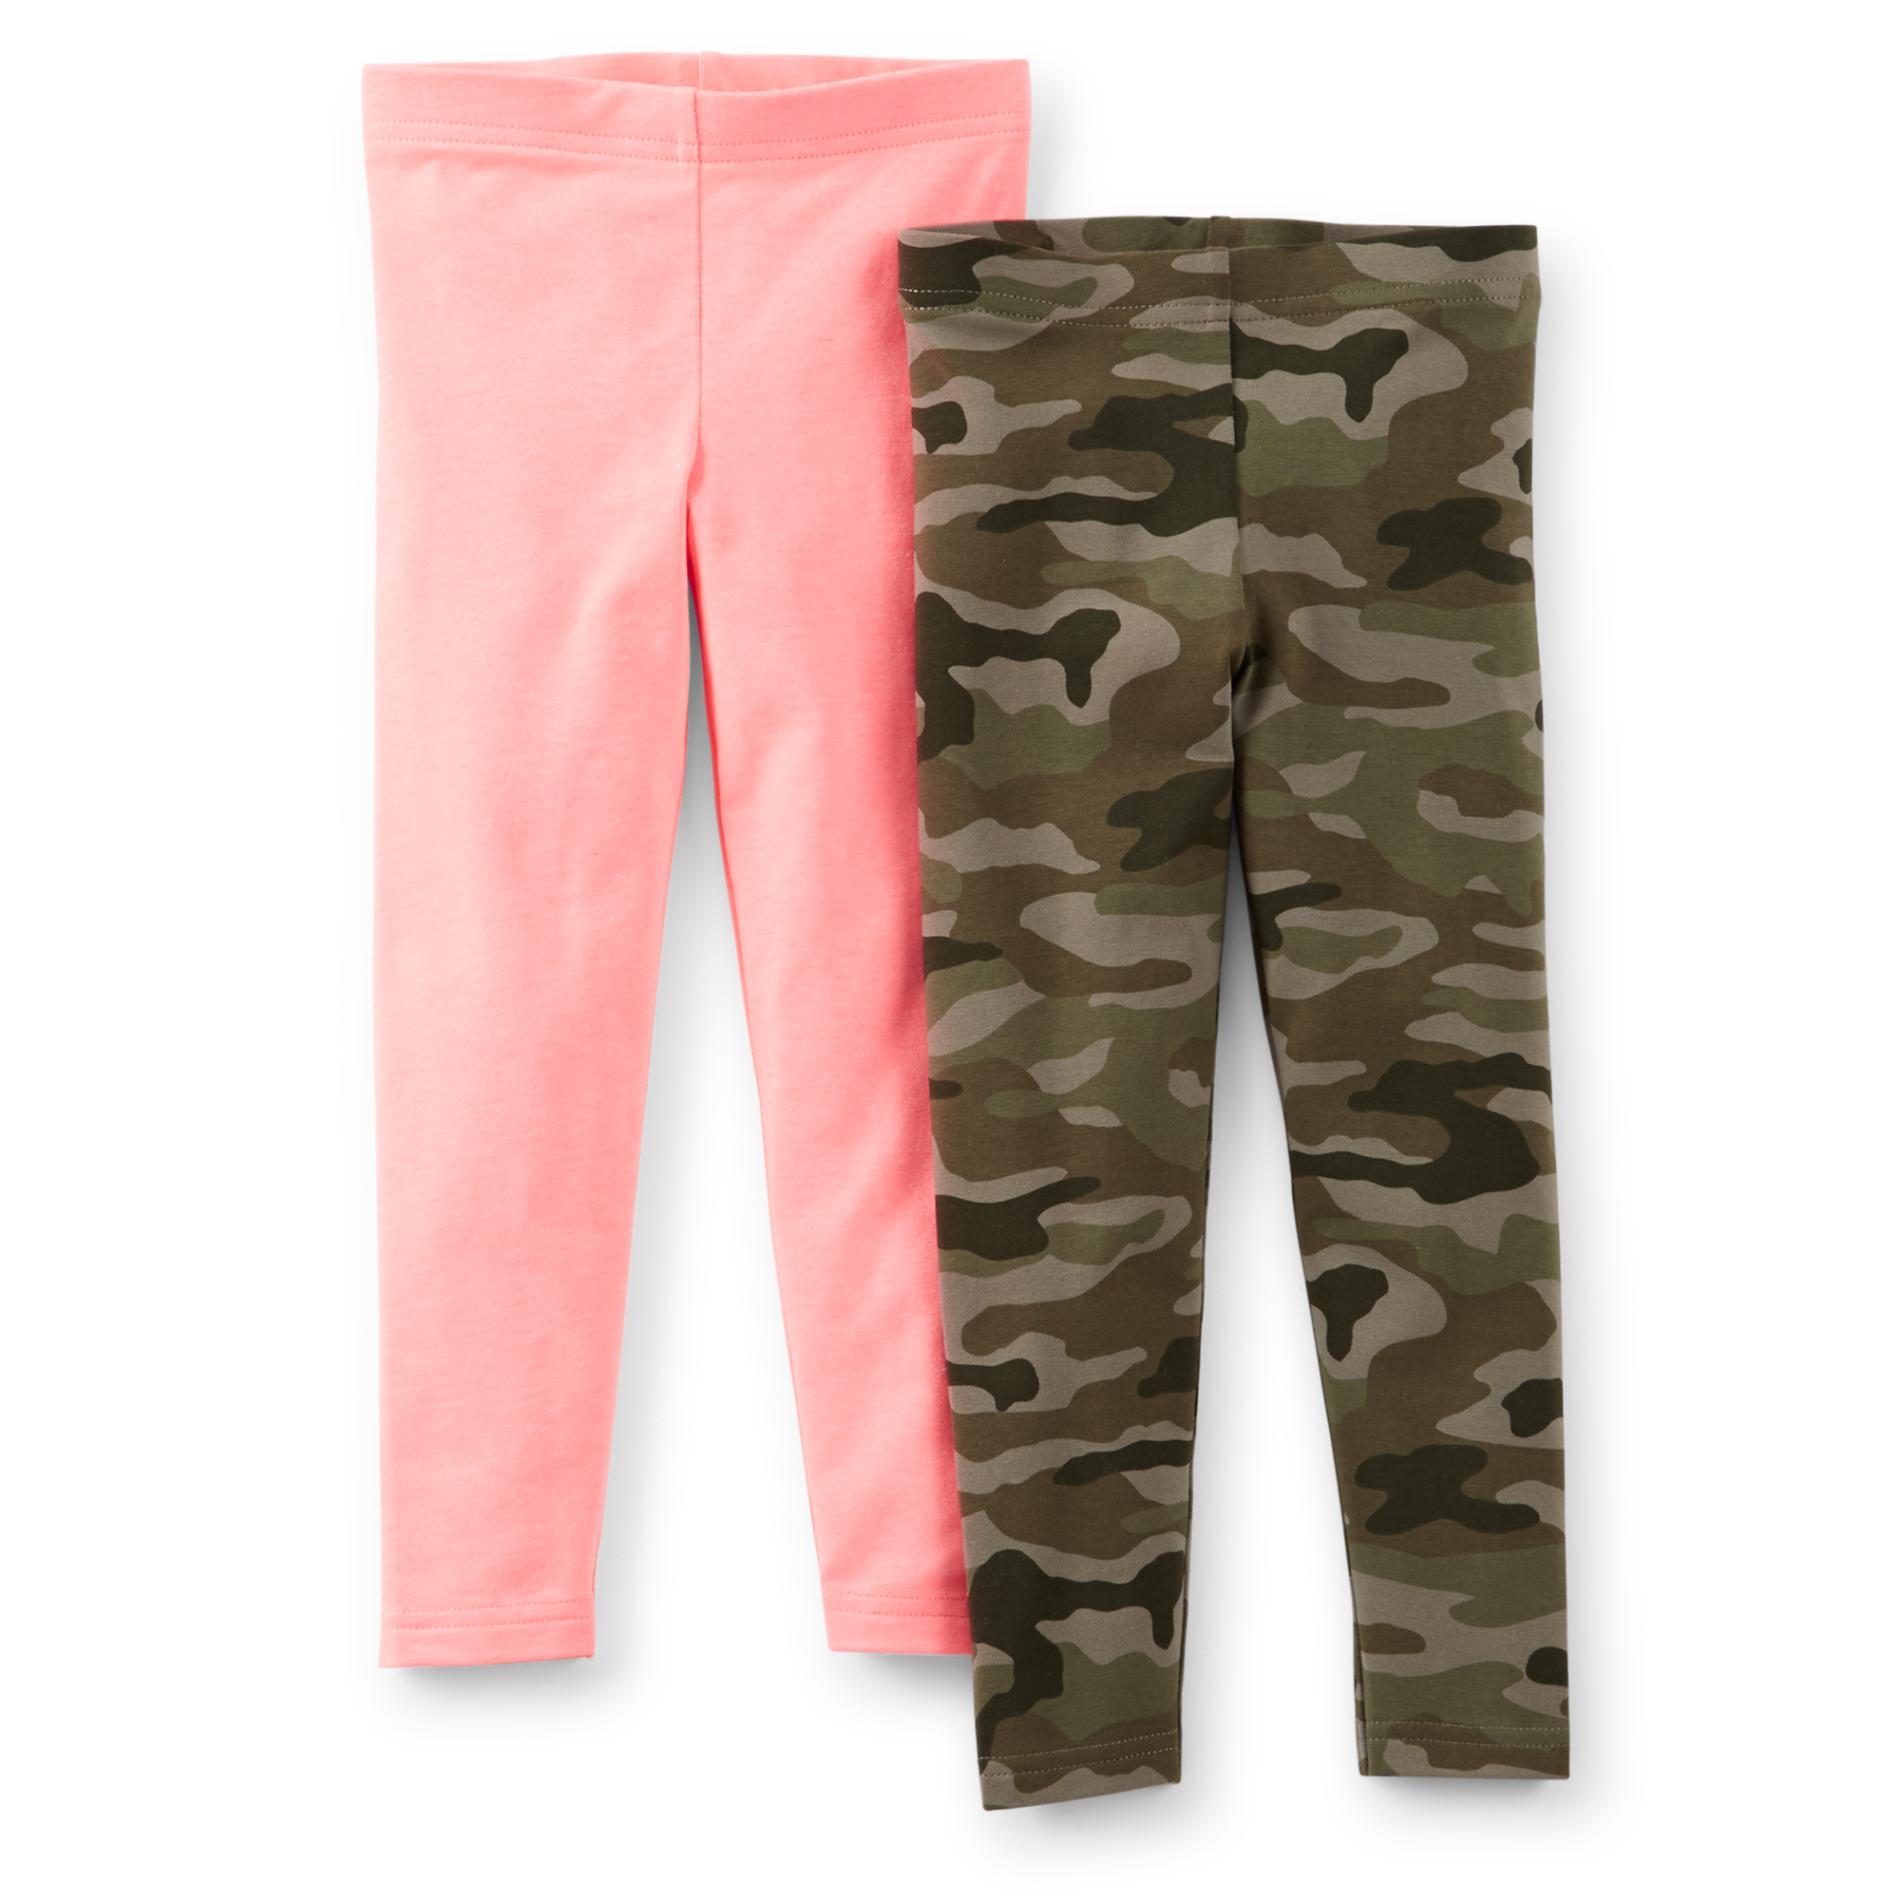 Carter's Girl's 2-Pairs Leggings - Camouflage & Solid